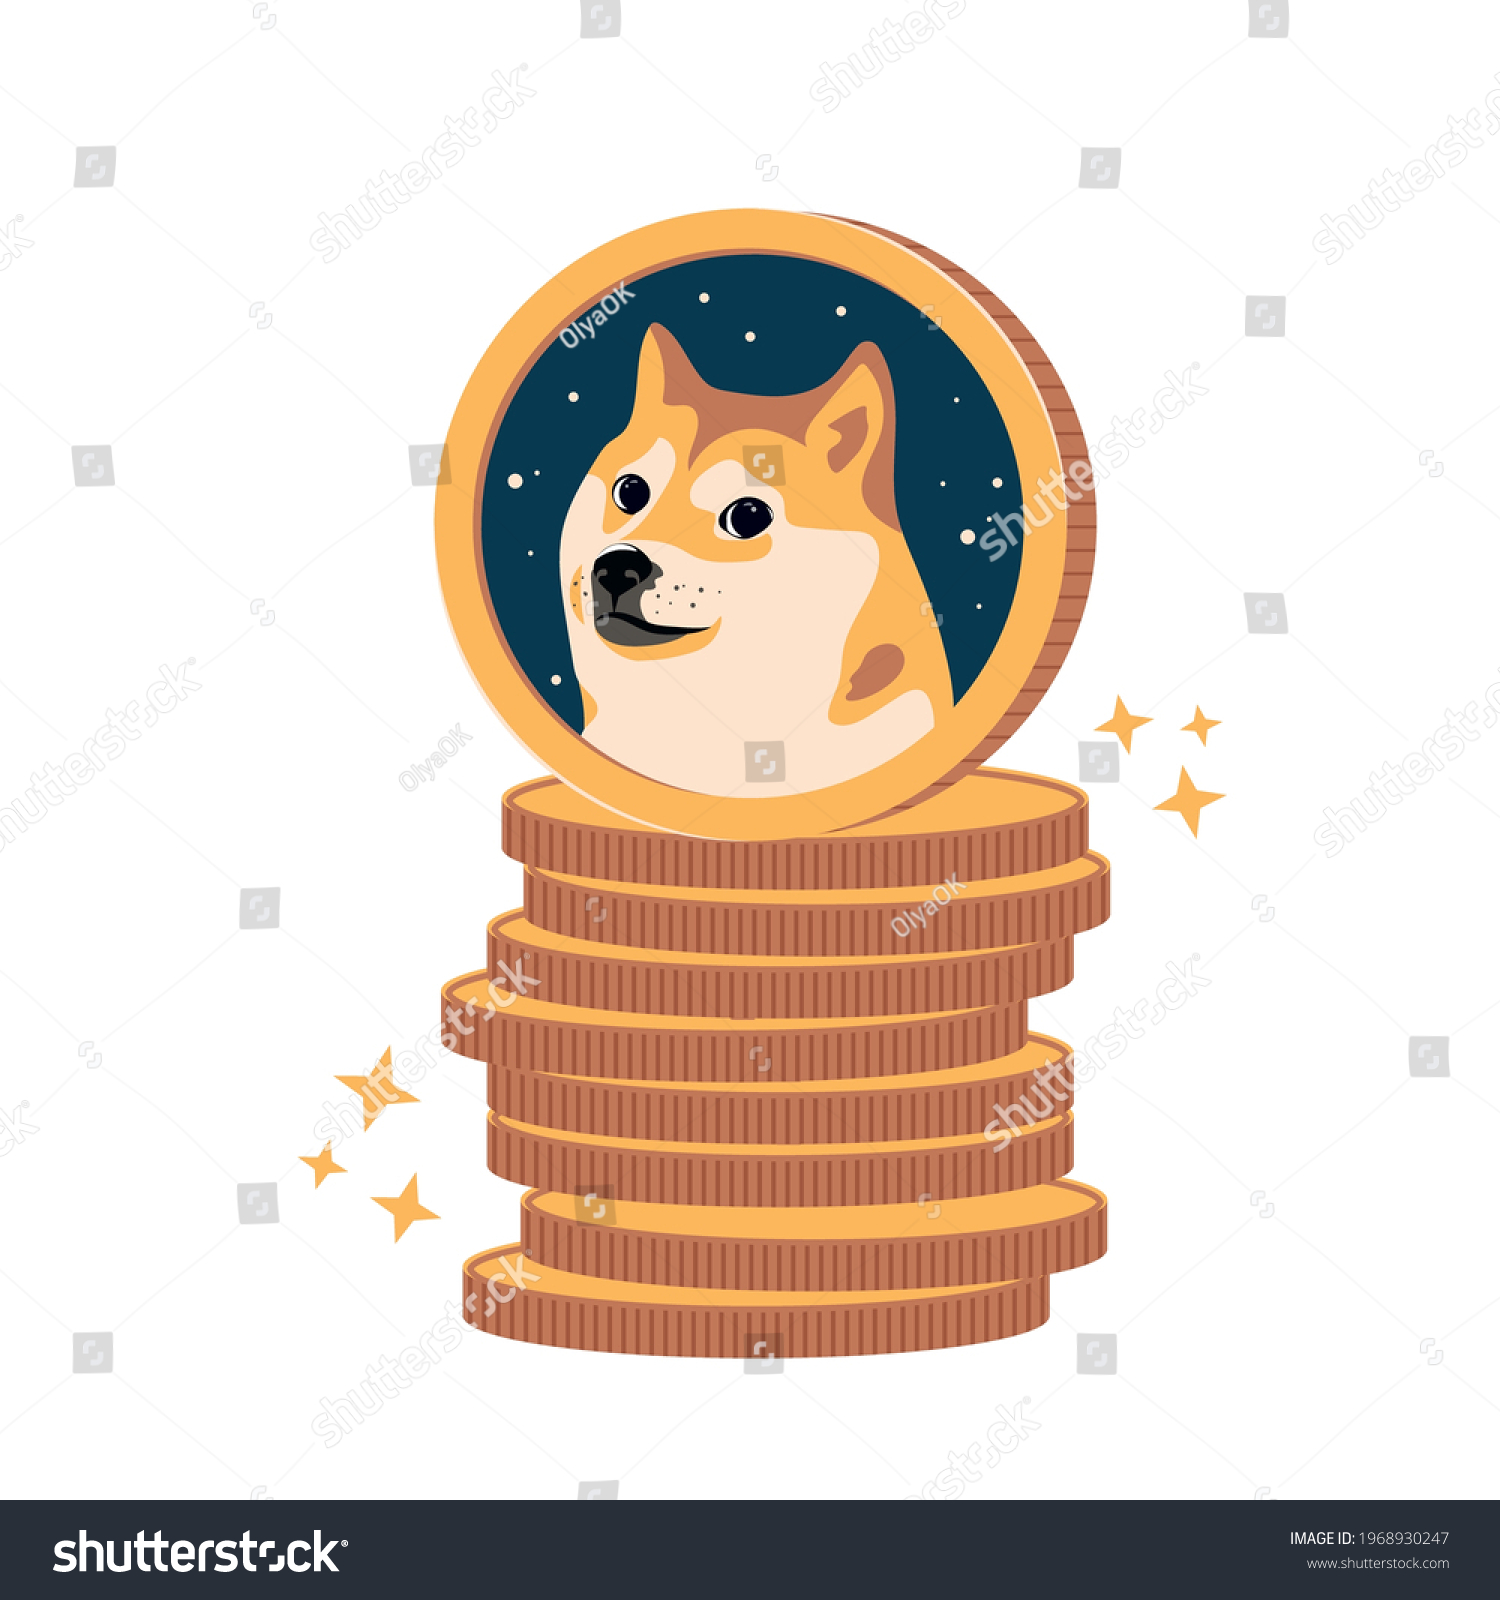 SVG of Dogecoin DOGE cryptocurrency on a stack of coins vector illustration isolated on white background. Stock crypto. Face of the Shiba Inu dog in space on coin. Symbol digital currency. svg